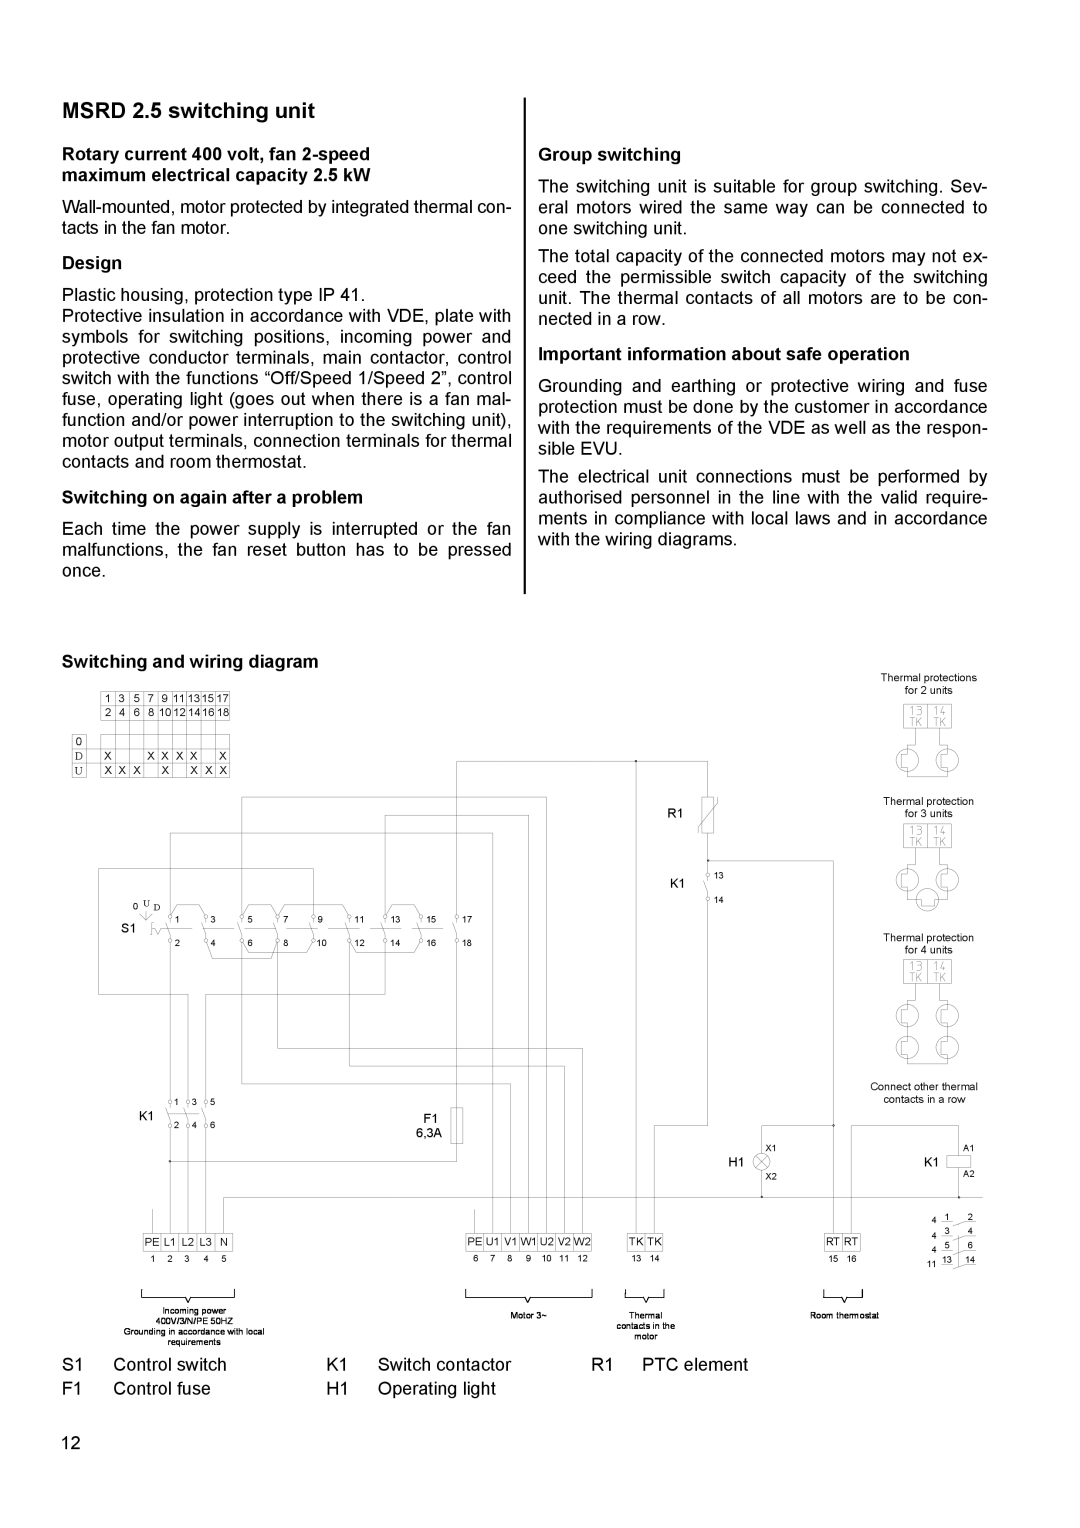 Panasonic PWW 4000 manual MSRD 2.5 switching unit, Design, Switching on again after a problem, Switching and wiring diagram 